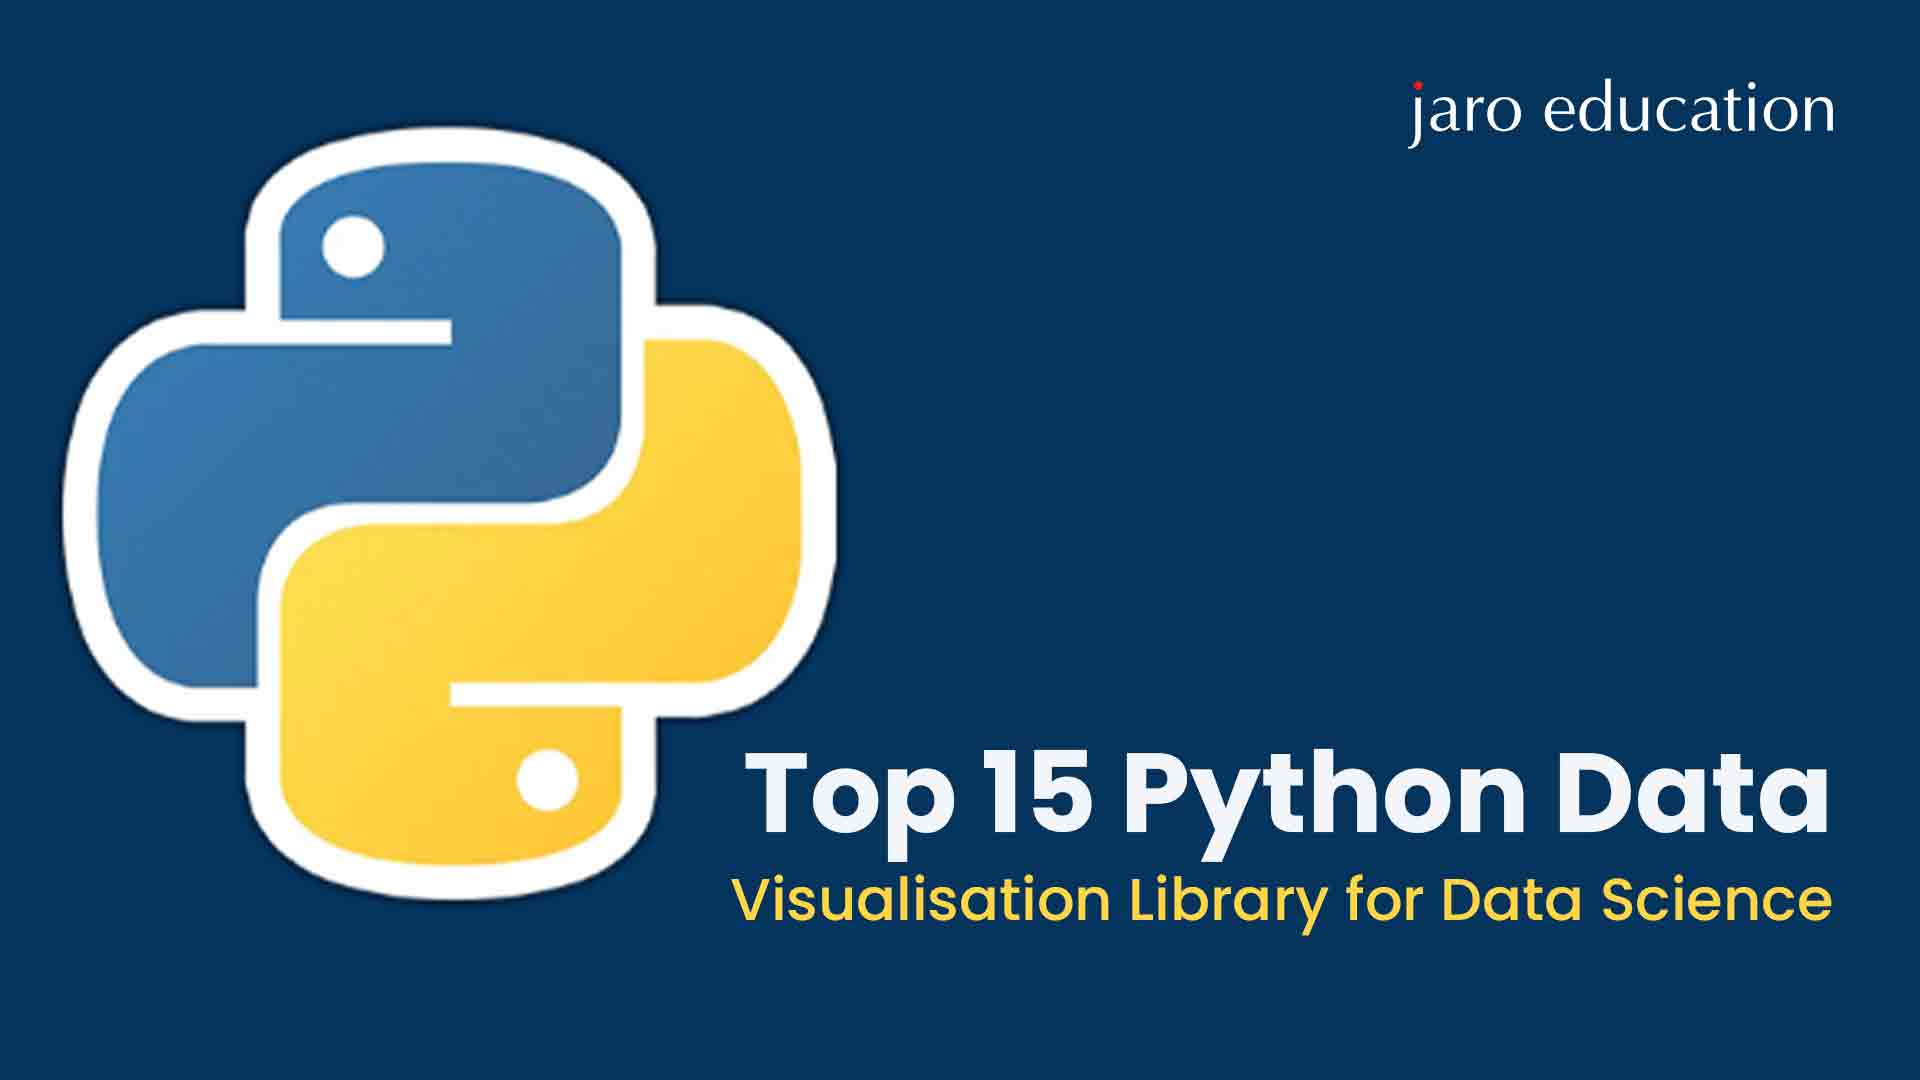 Top-15-Python-Data-Visualisation-Library-for-Data-Science